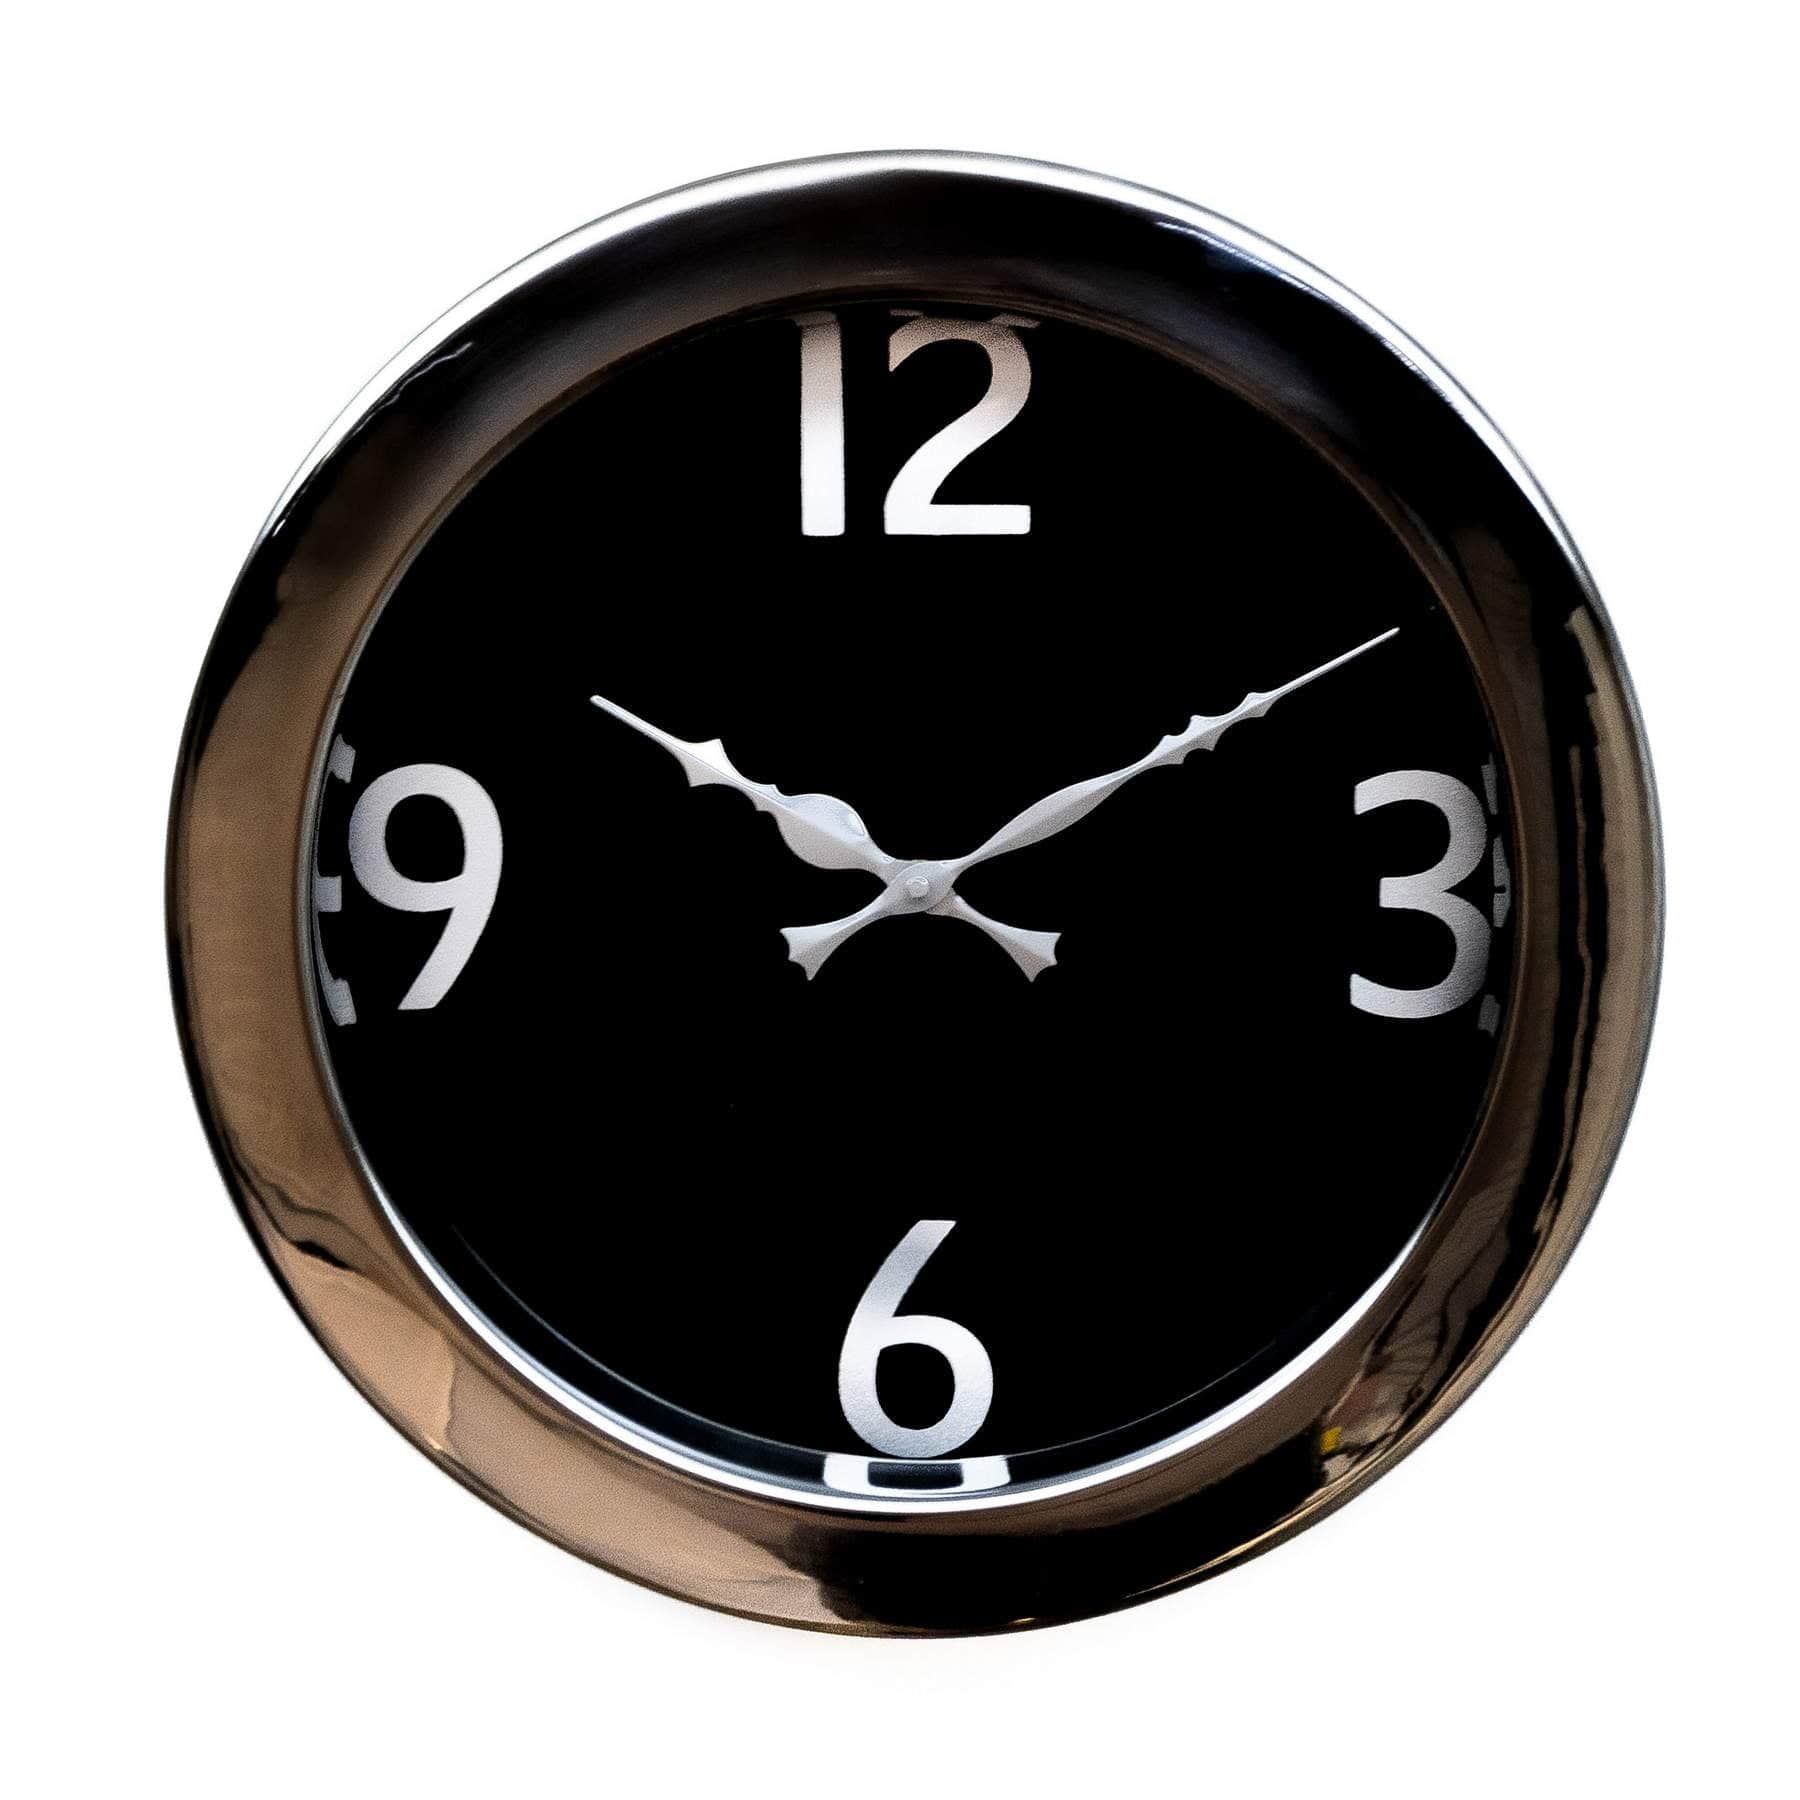 Black & Silver Stainless Steel Wall Clock Elevate Home Decor - Wall Clocks